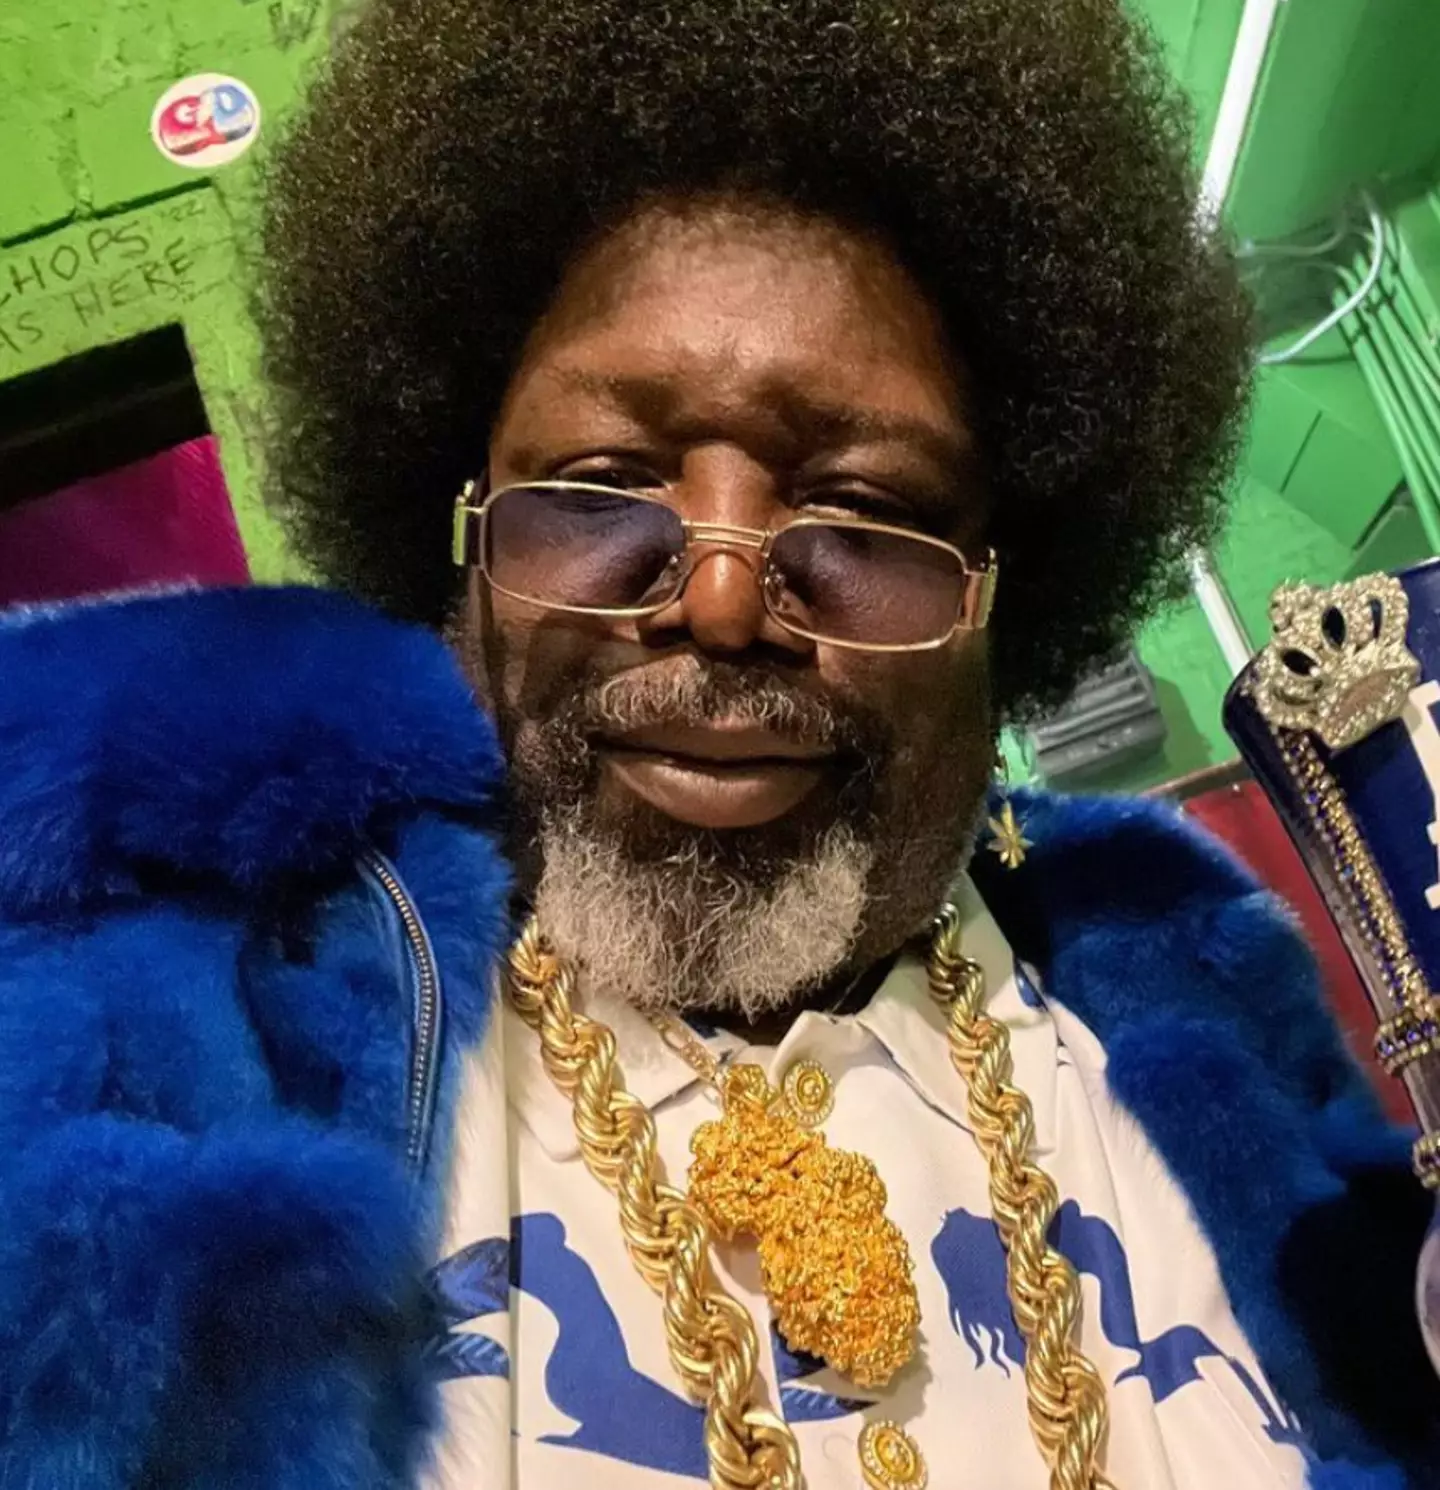 Afroman is being sued for invasion of privacy.